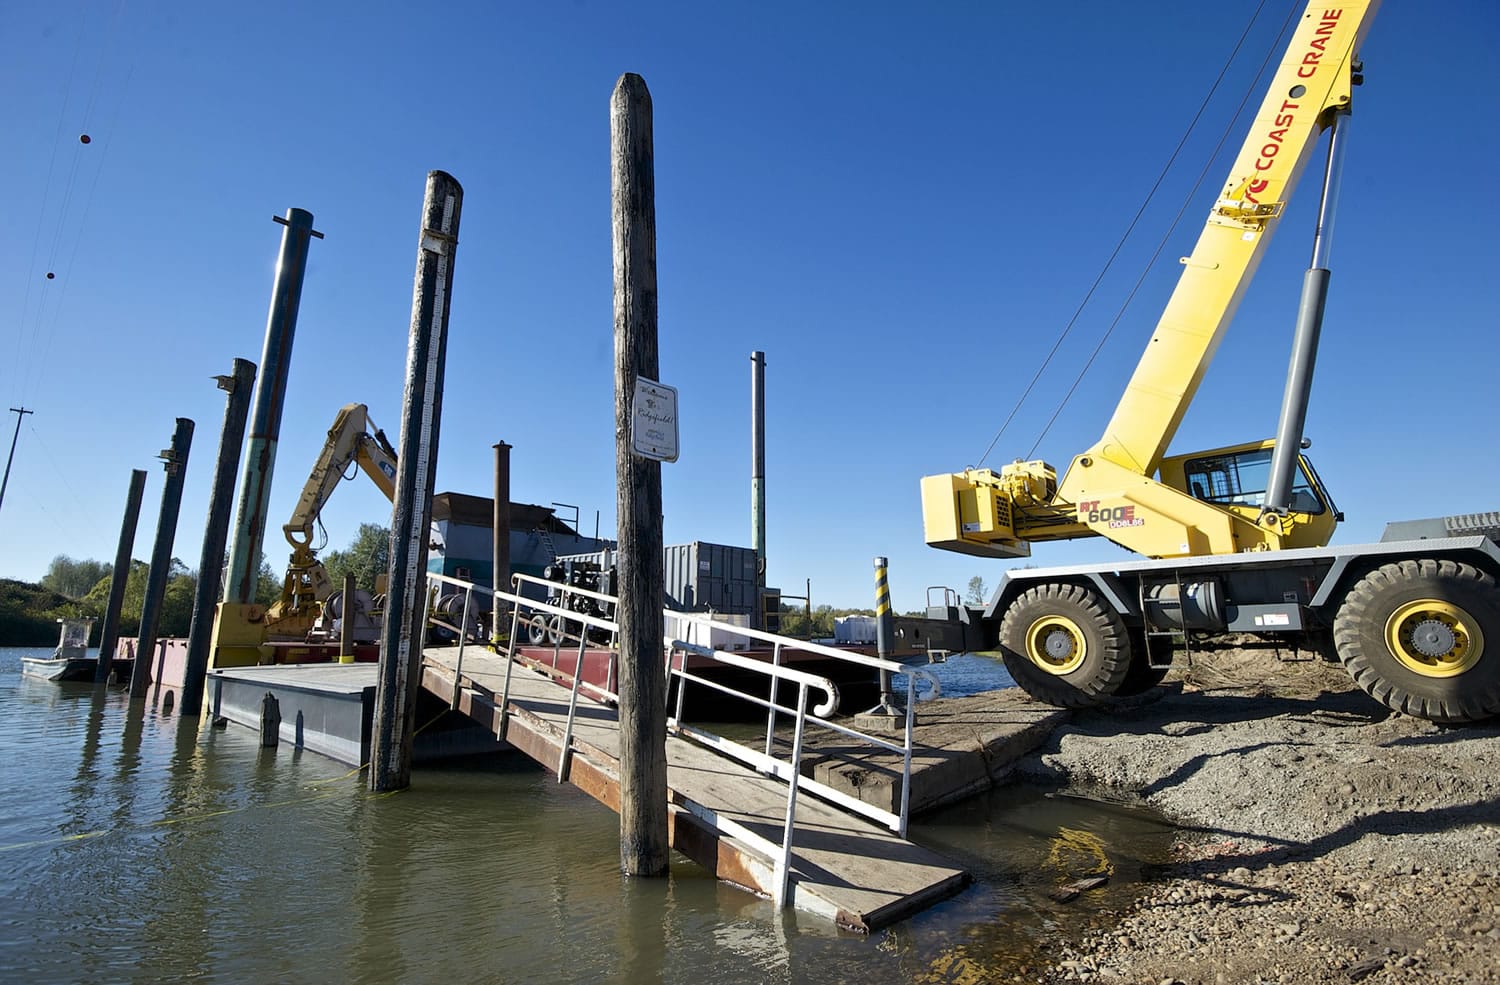 Dredging equipment sits ready to go Monday next to Lake River.